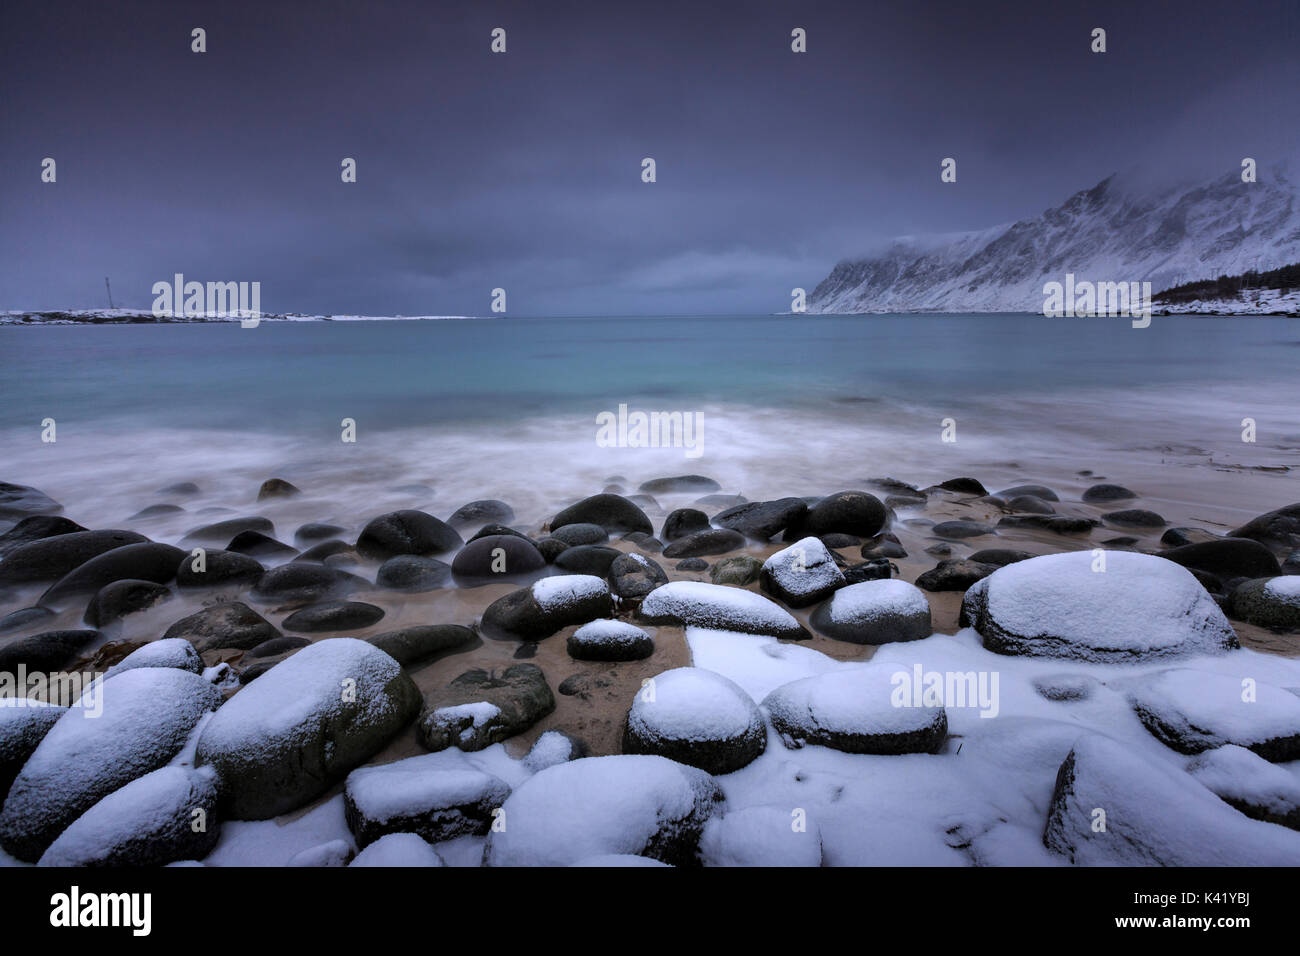 Snow covered rocks on the beach modeled by the wind surround the icy sea Pollen Vareid Flakstad Lofoten Islands Norway Europe Stock Photo